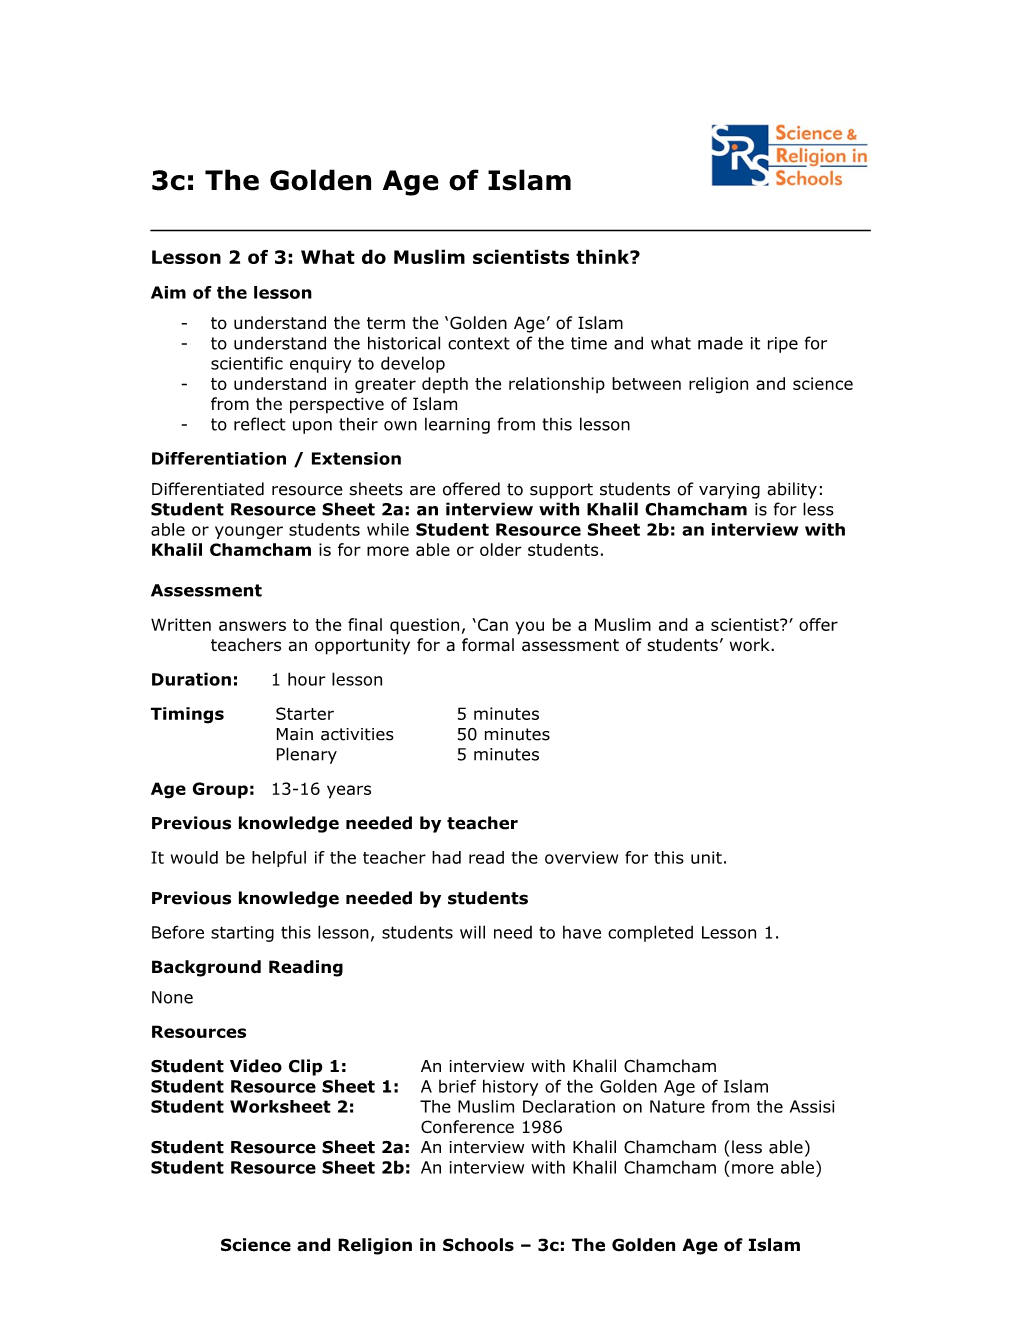 3C: the Golden Age of Islam